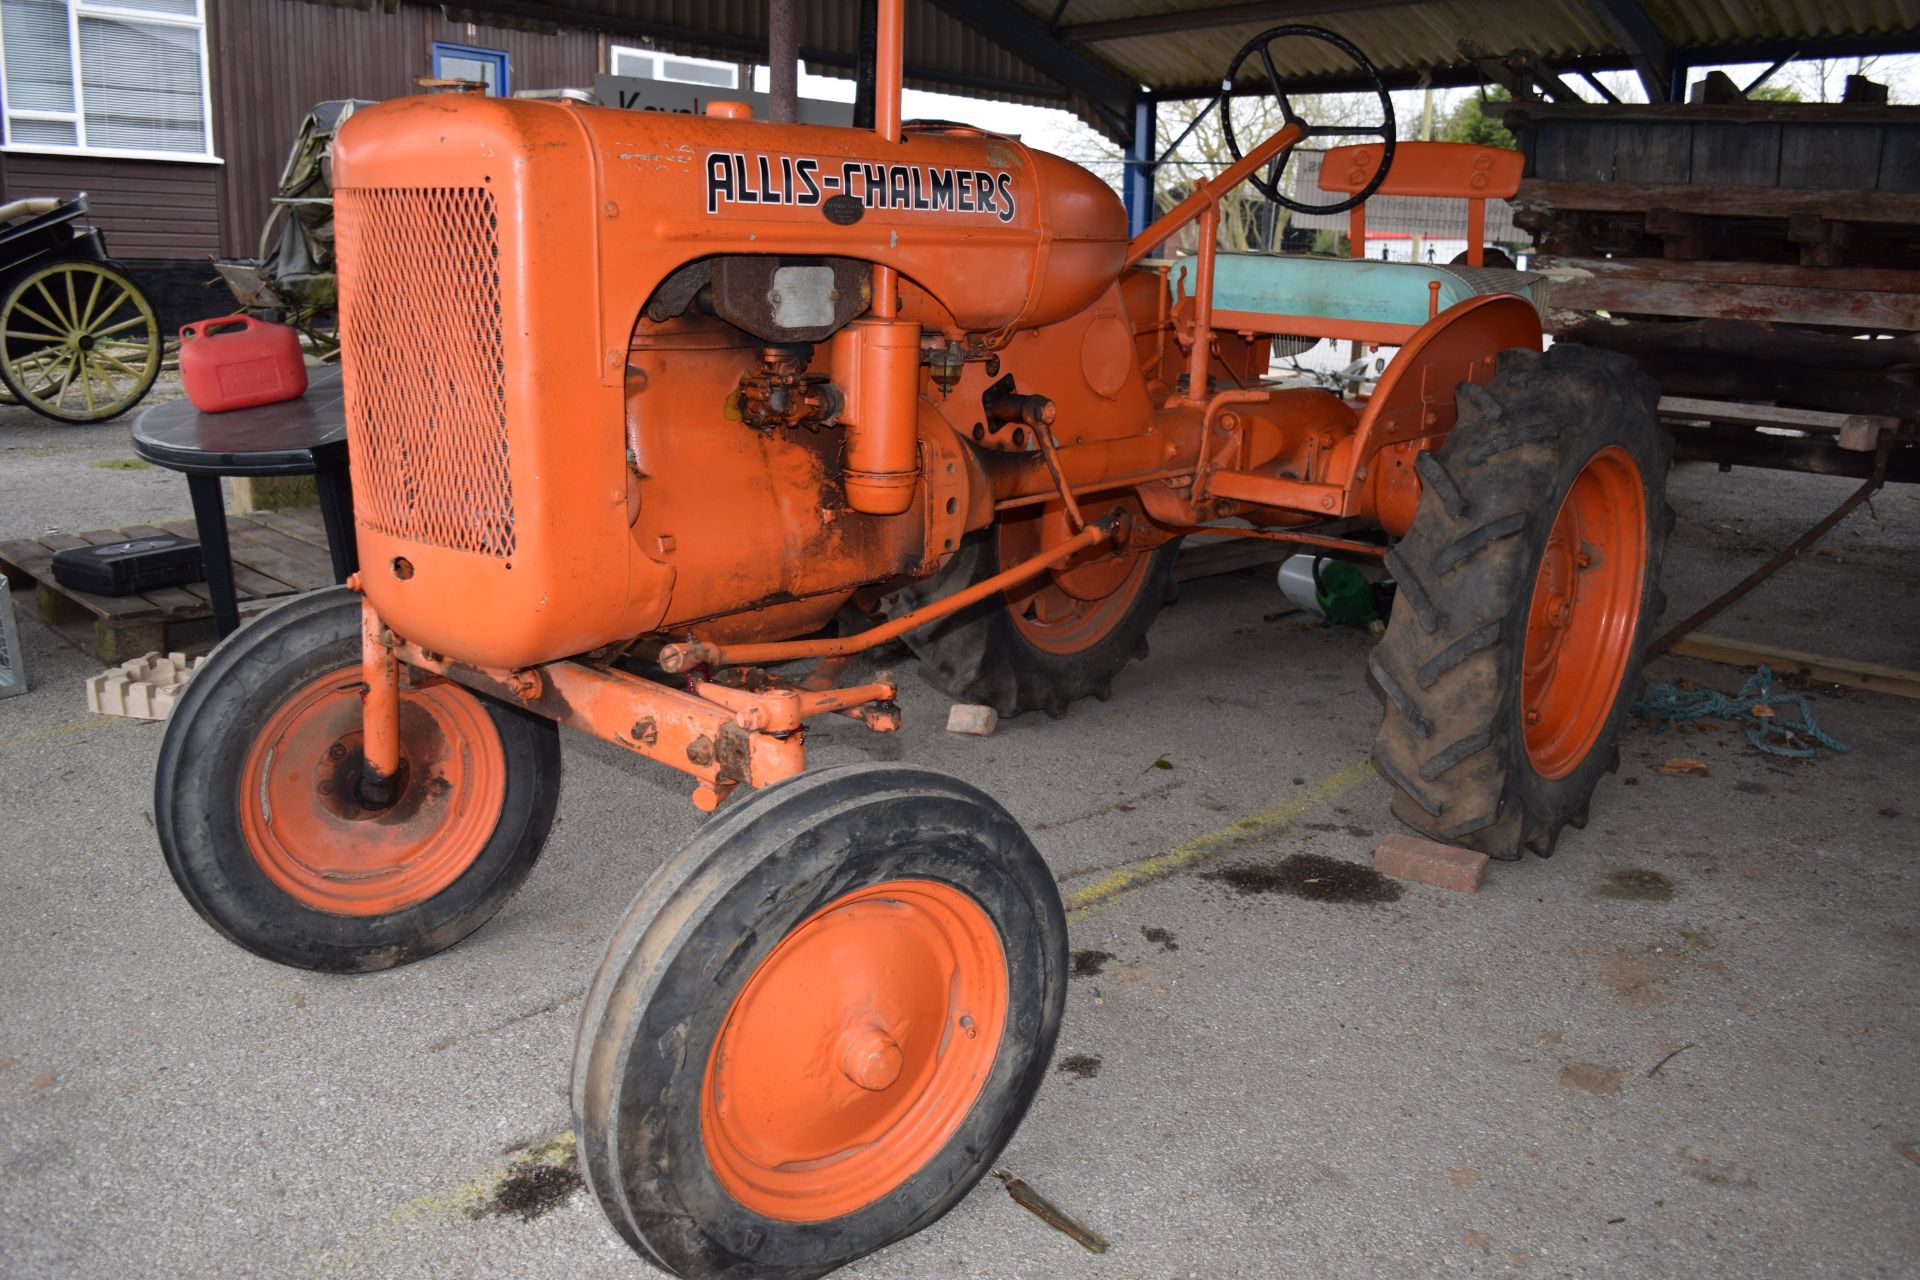 1950s Allis Chalmers model B Tractor, has been subject to a past restoration, good tinwork